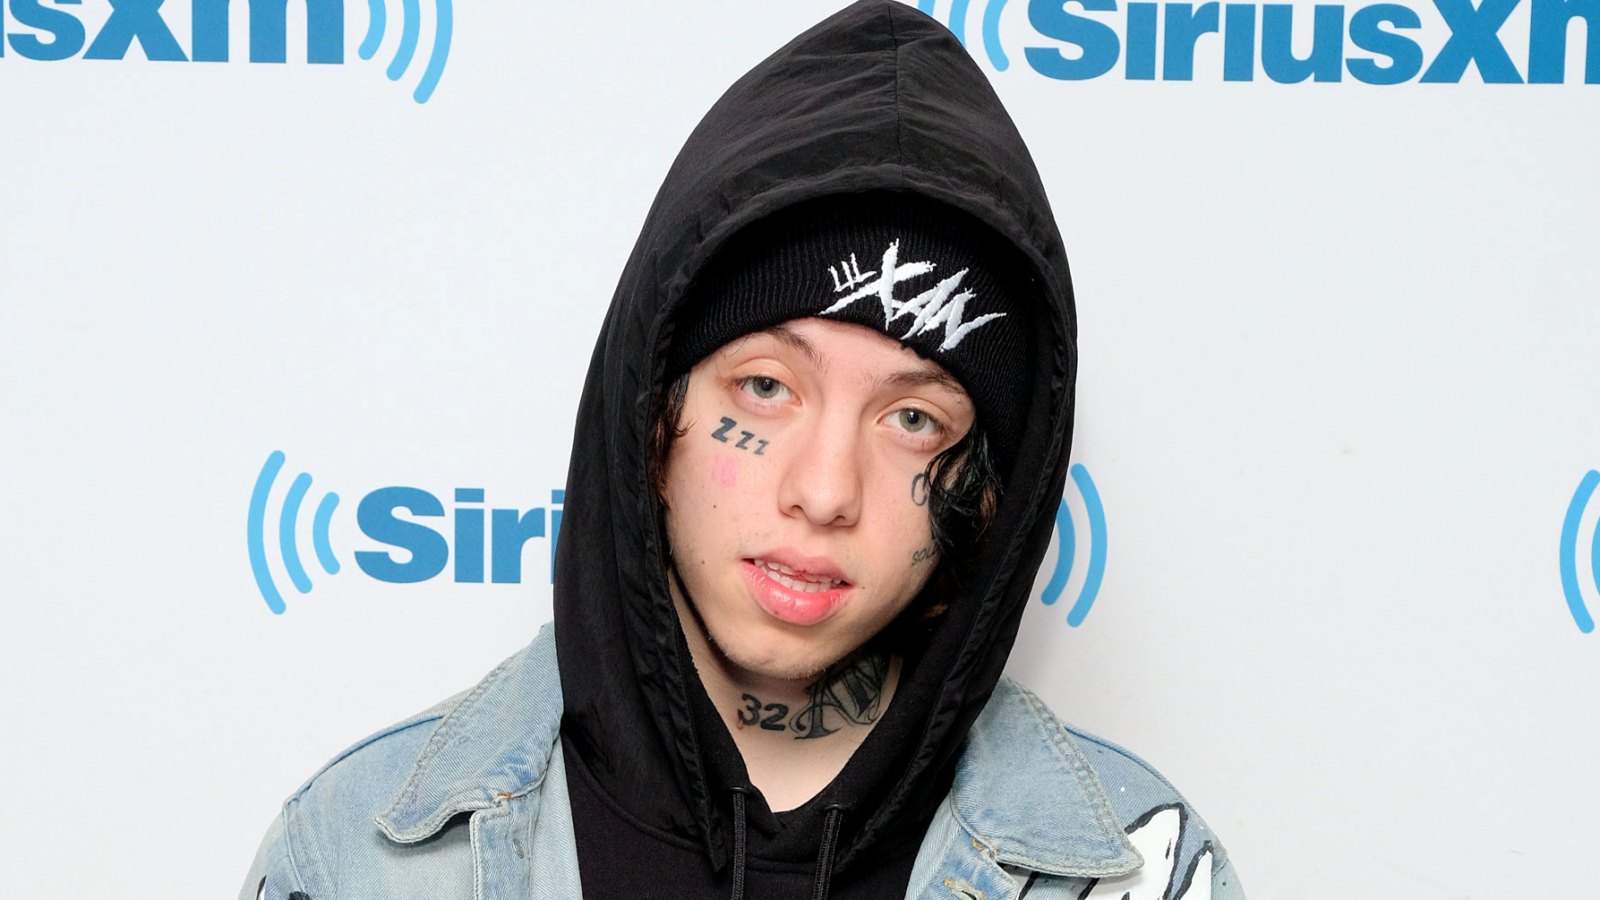 Lil Xan Pulls Handgun at a Gas Station, Claims He Was 'Defending' Himself